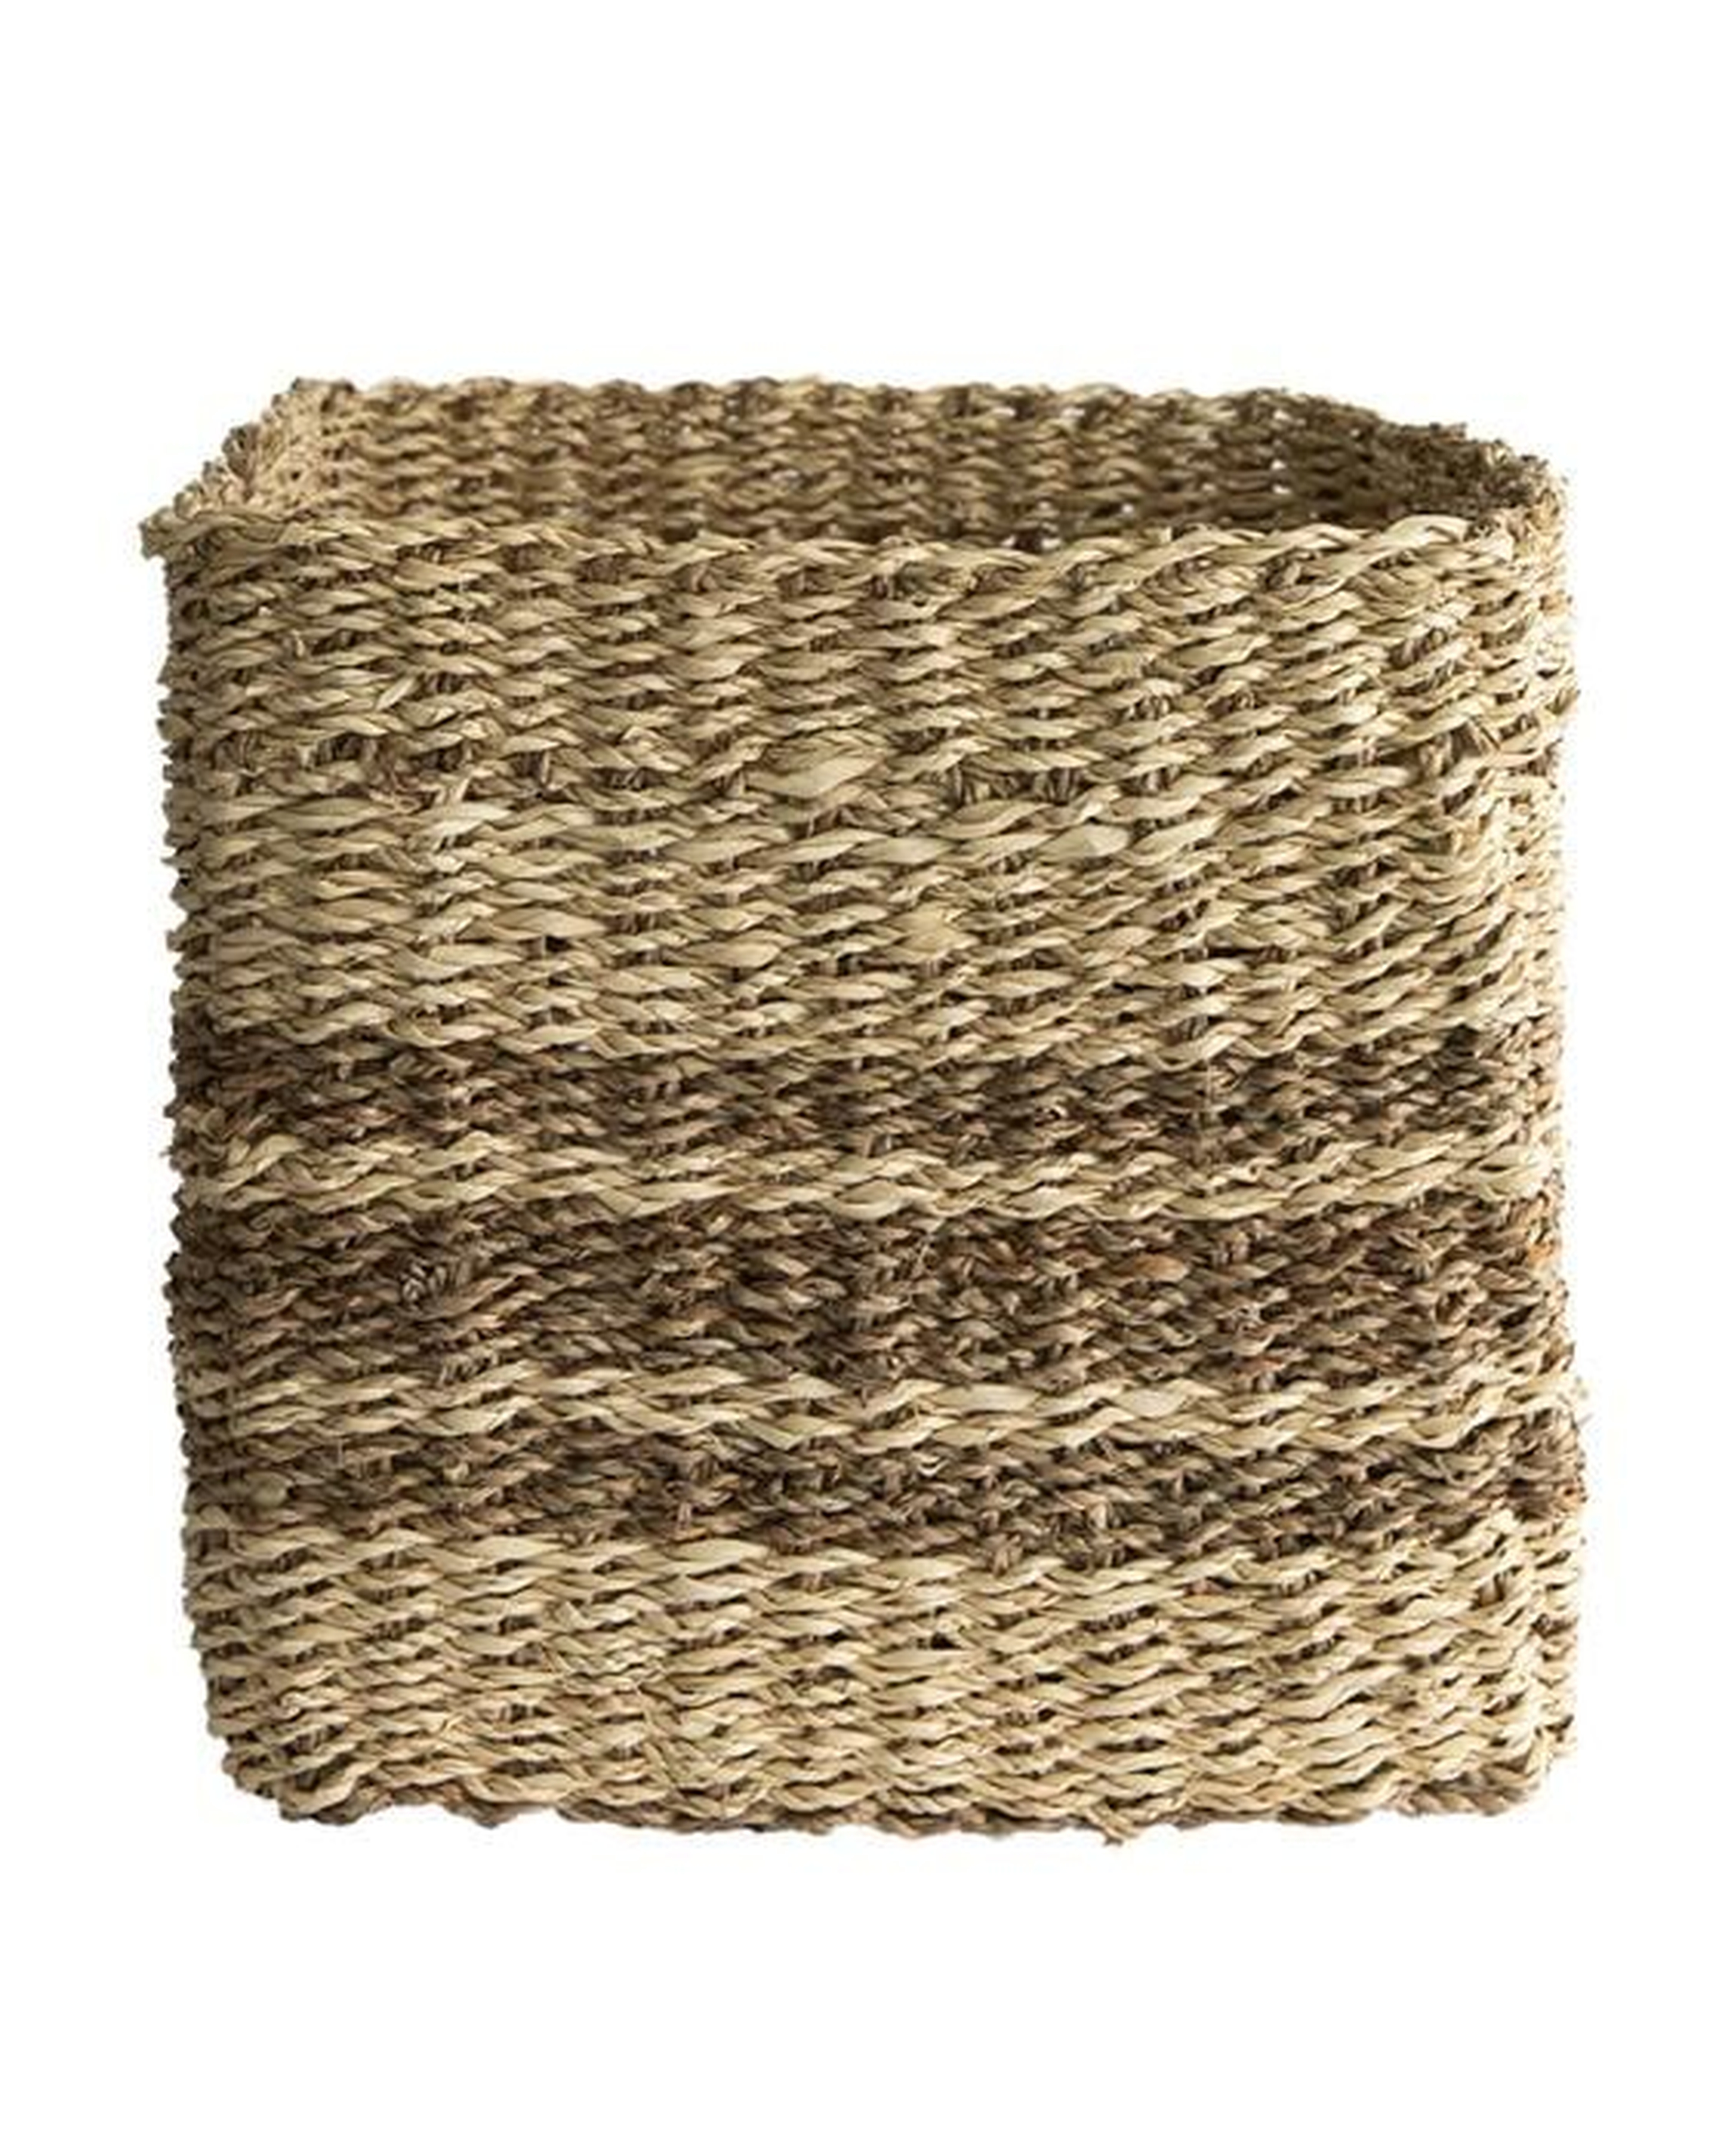 Conway Basket - McGee & Co.